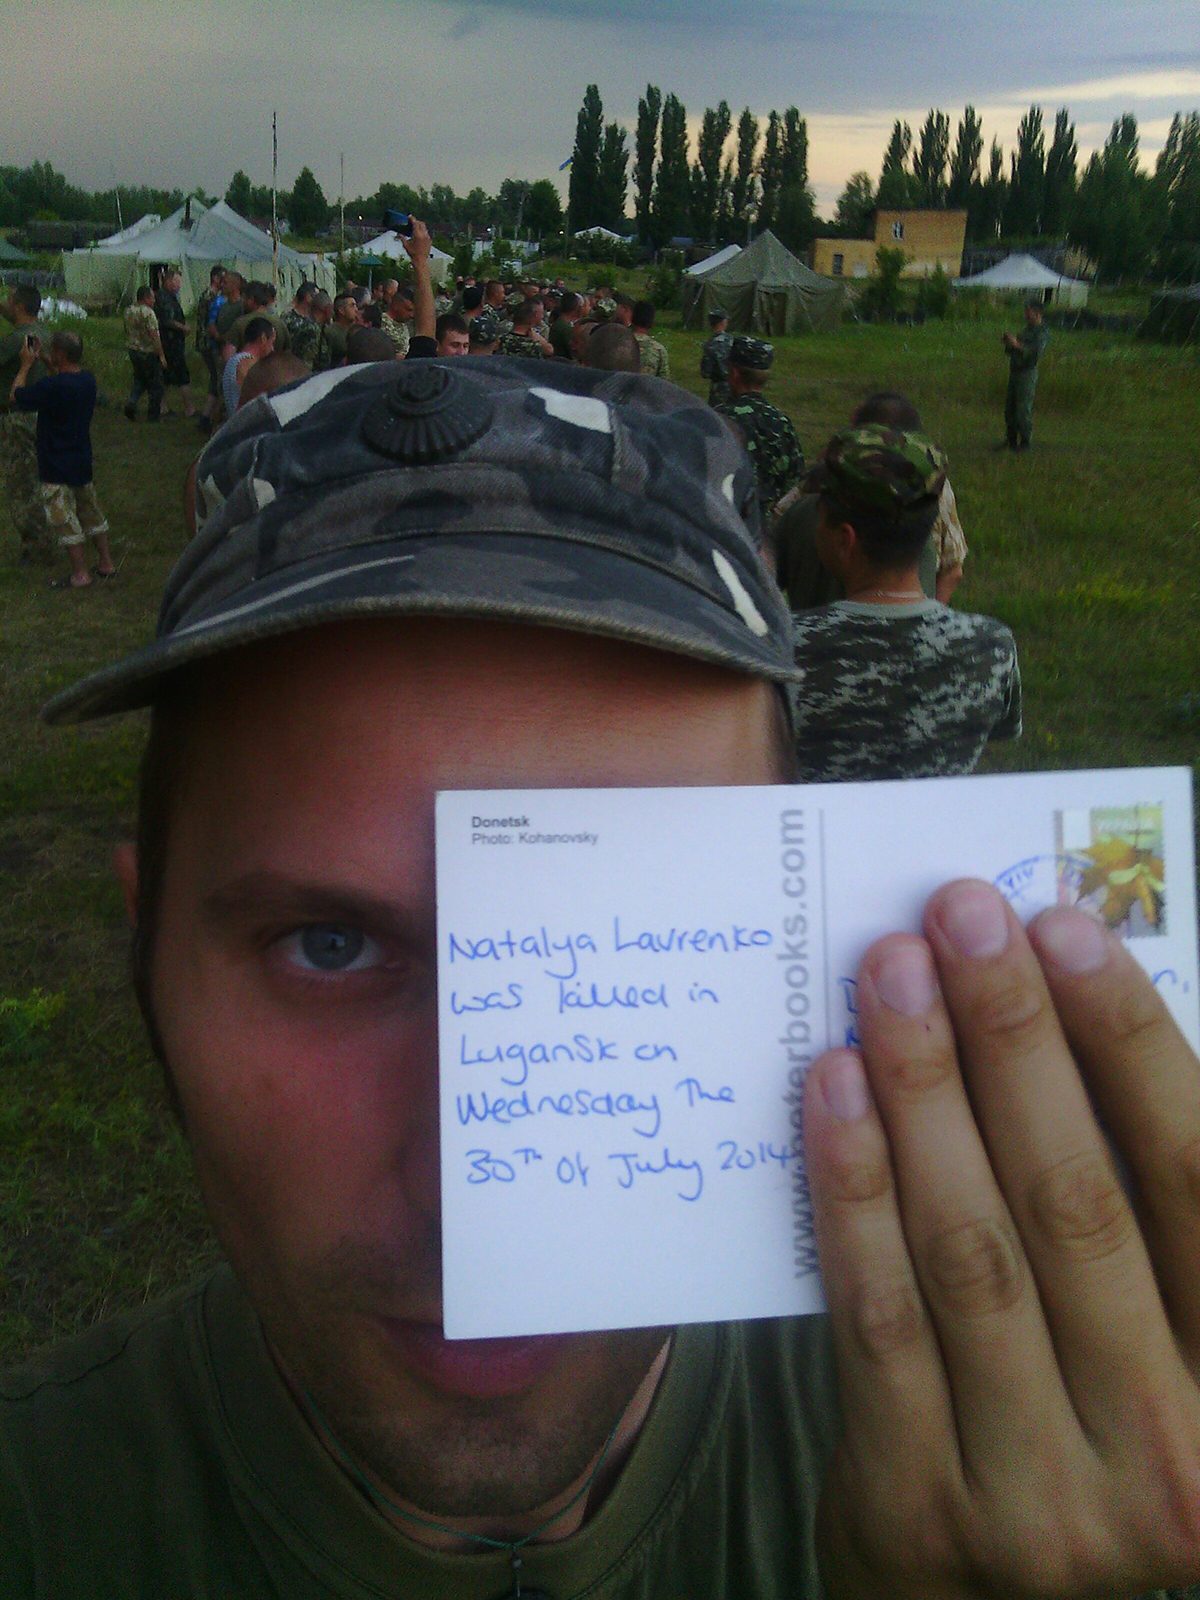 Dmitry Kupriyan, a soldier in the Ukrainian Army, was one of the few who received a postcard within Ukraine